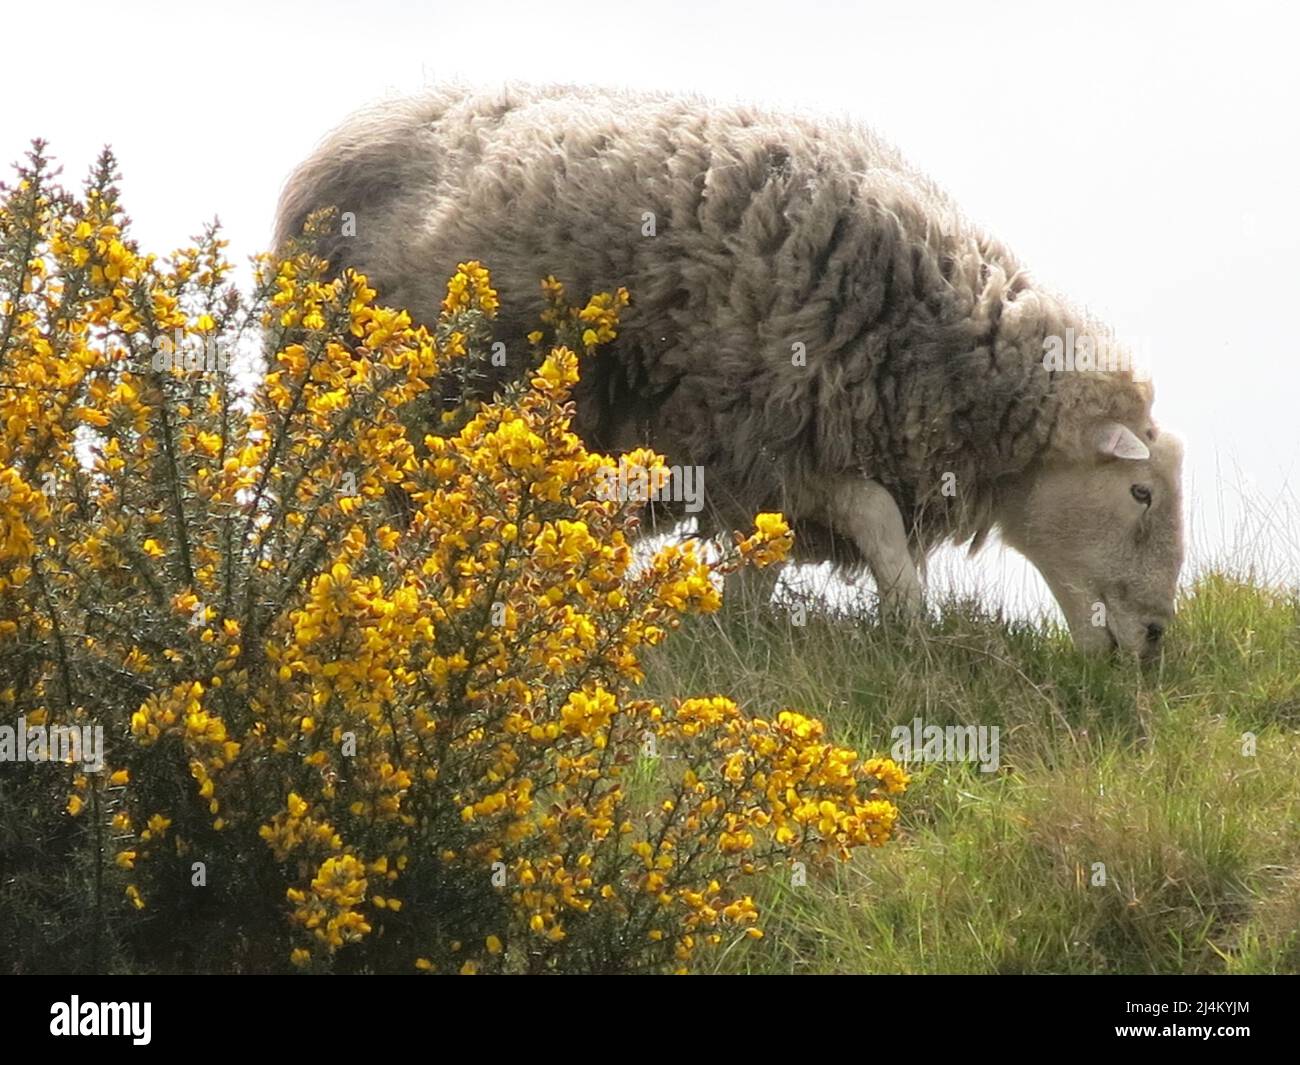 A sheep with a thick, woolly fleece is grazing next to a shrub of yellow gorse on a mound in the spring sunshine at Sutton Hoo. Stock Photo